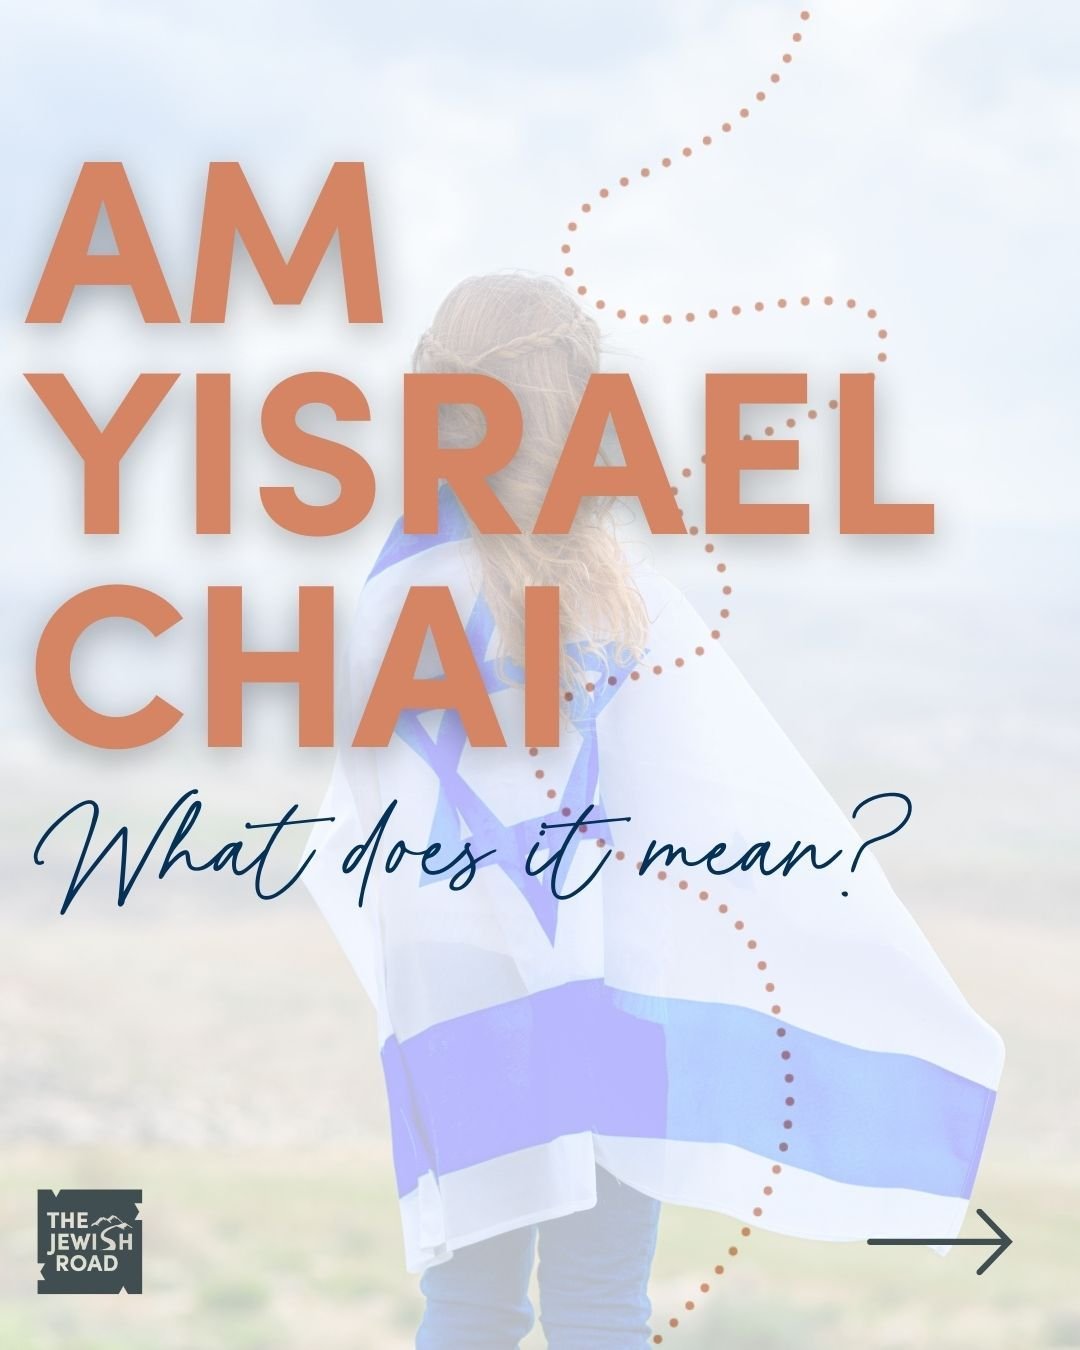 Have you seen and heard the expression &quot;Am Yisrael Chai&quot; and wondered what it means? 

Literally translated it means &quot;The People of Israel Live&quot; but it has come to mean so much more in recent months in response to the October 7th 